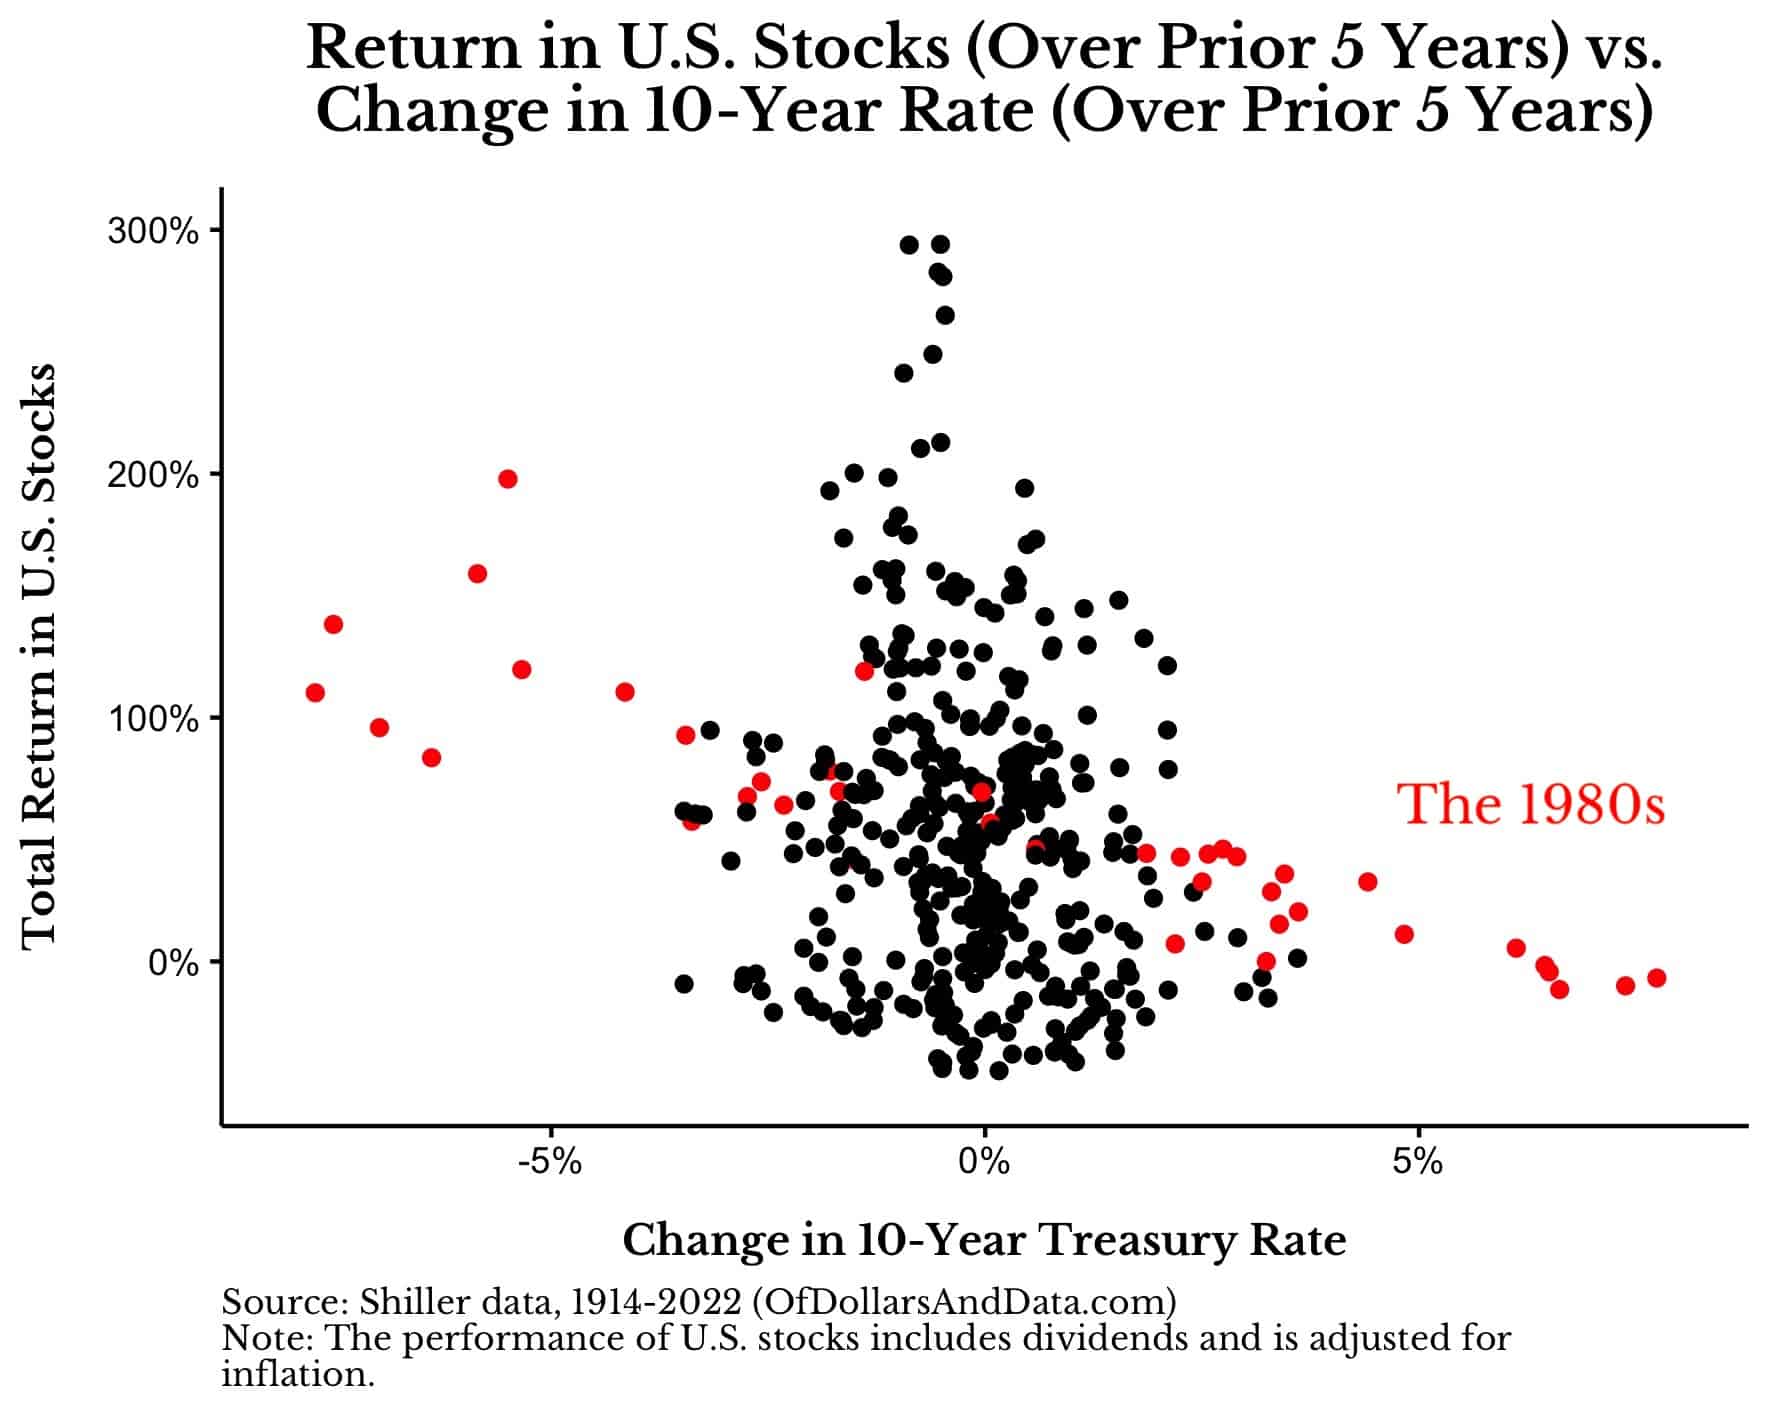 Return in US stocks over prior five years vs change in 10-year Treasury Rate over prior five years with the 1980s removed.